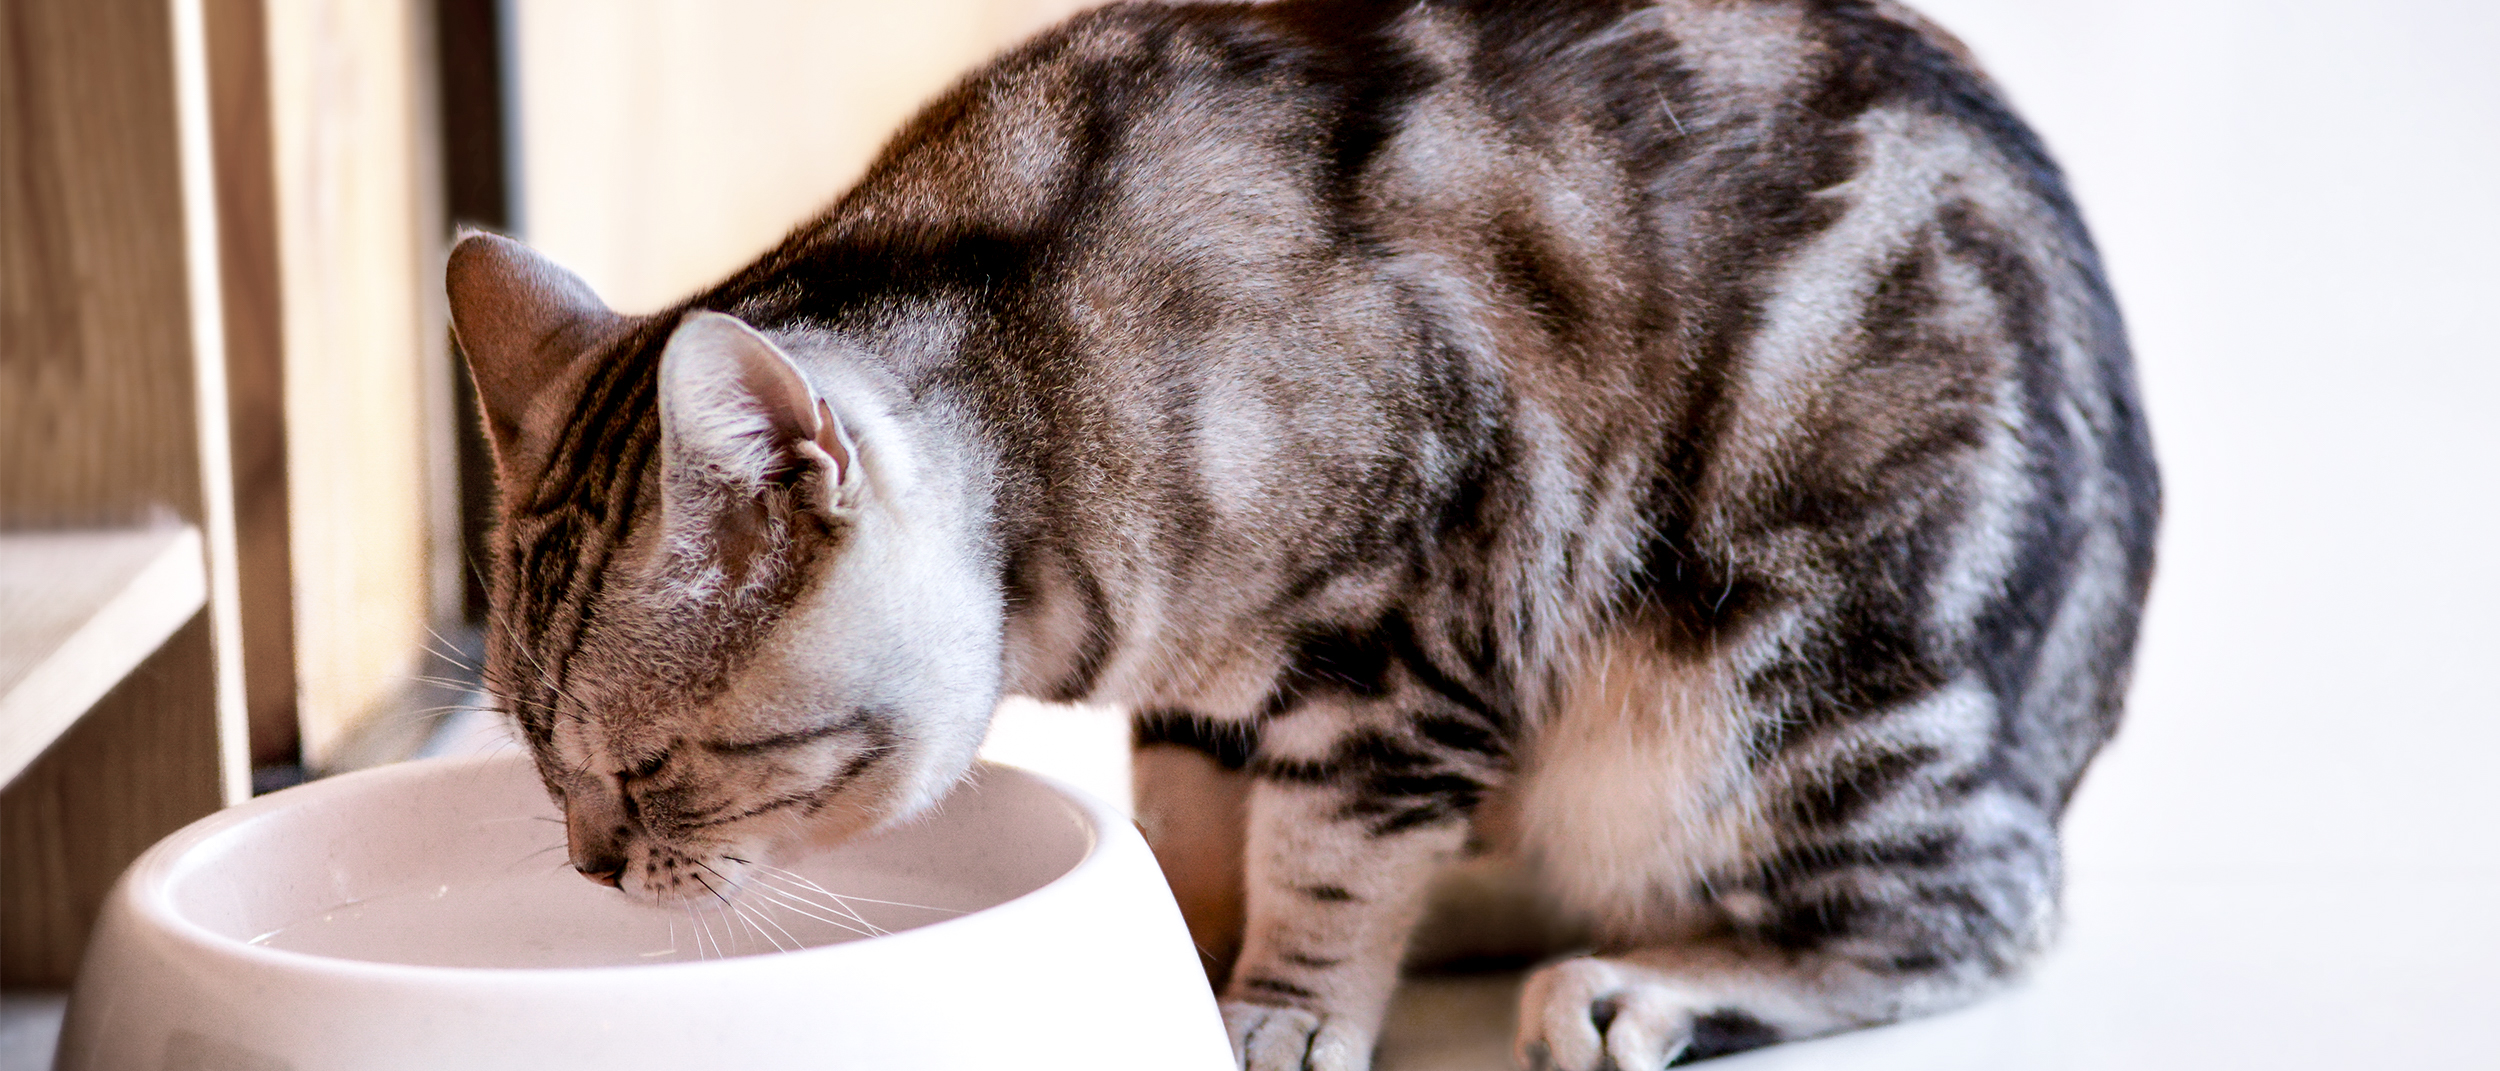 Adult cat sitting down drinking from a white bowl.